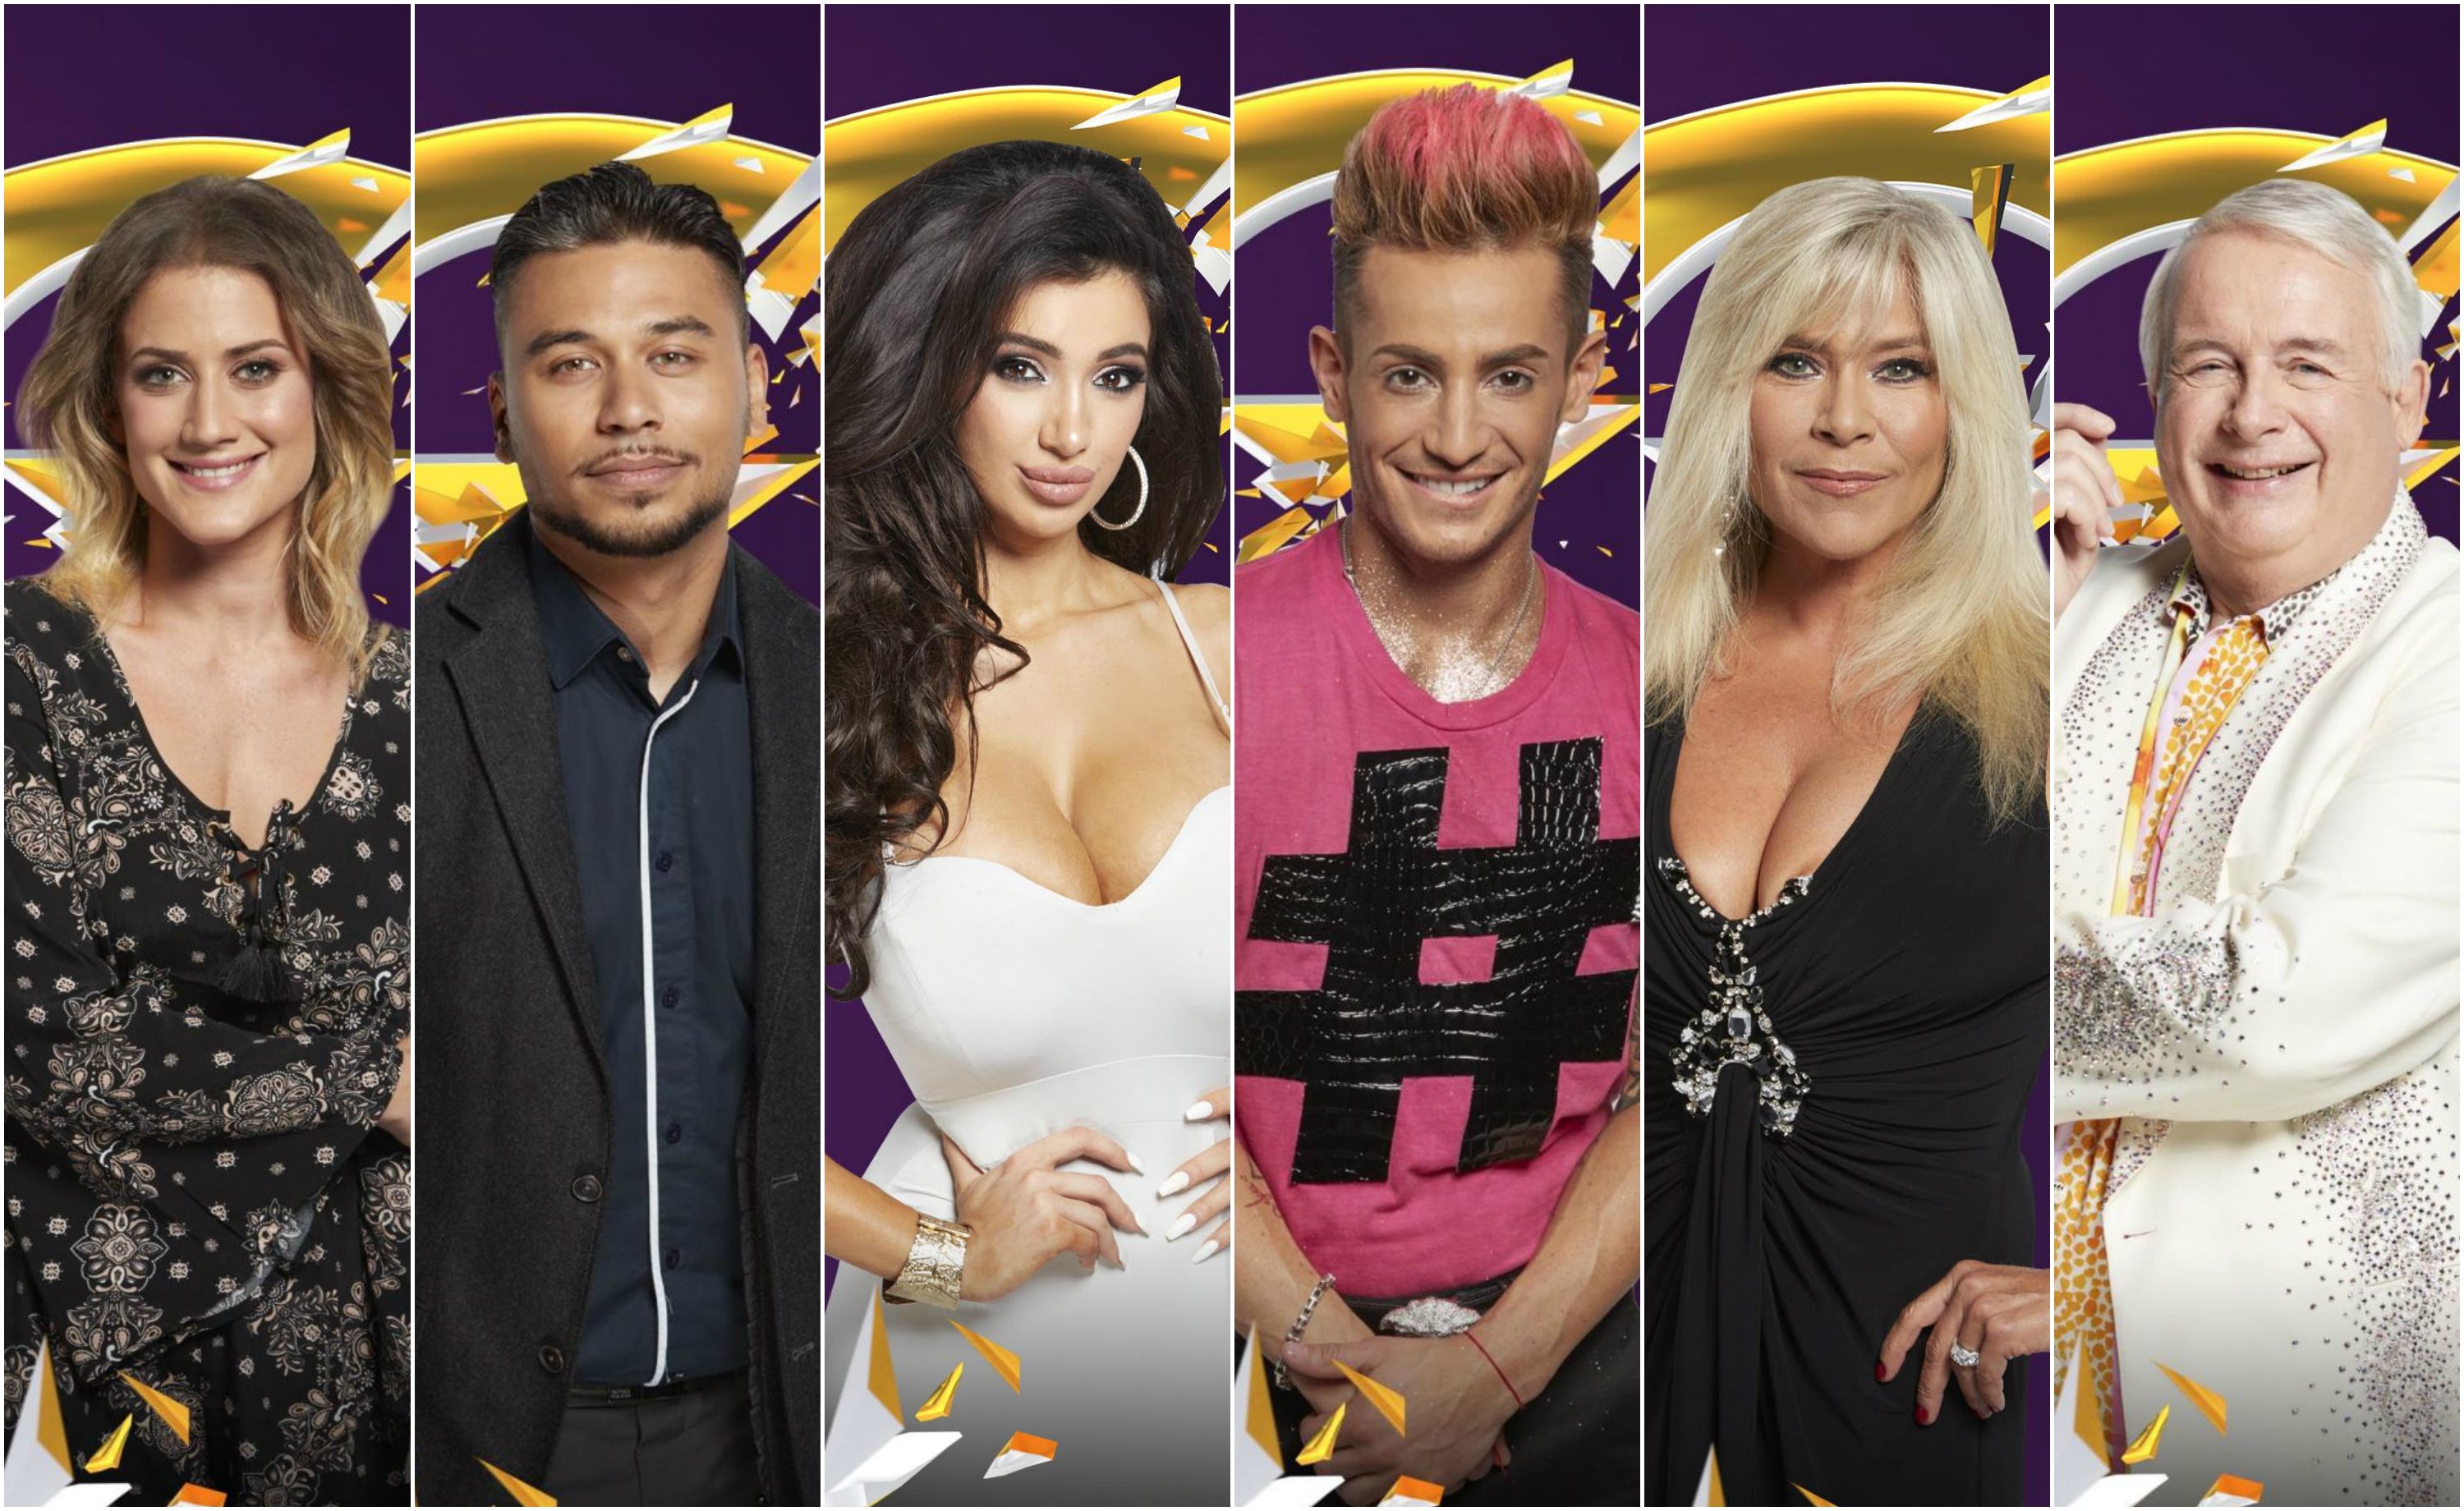 Celebrity Big Brother 2016 Meet the 17 outrageous housemates who will rule your summer